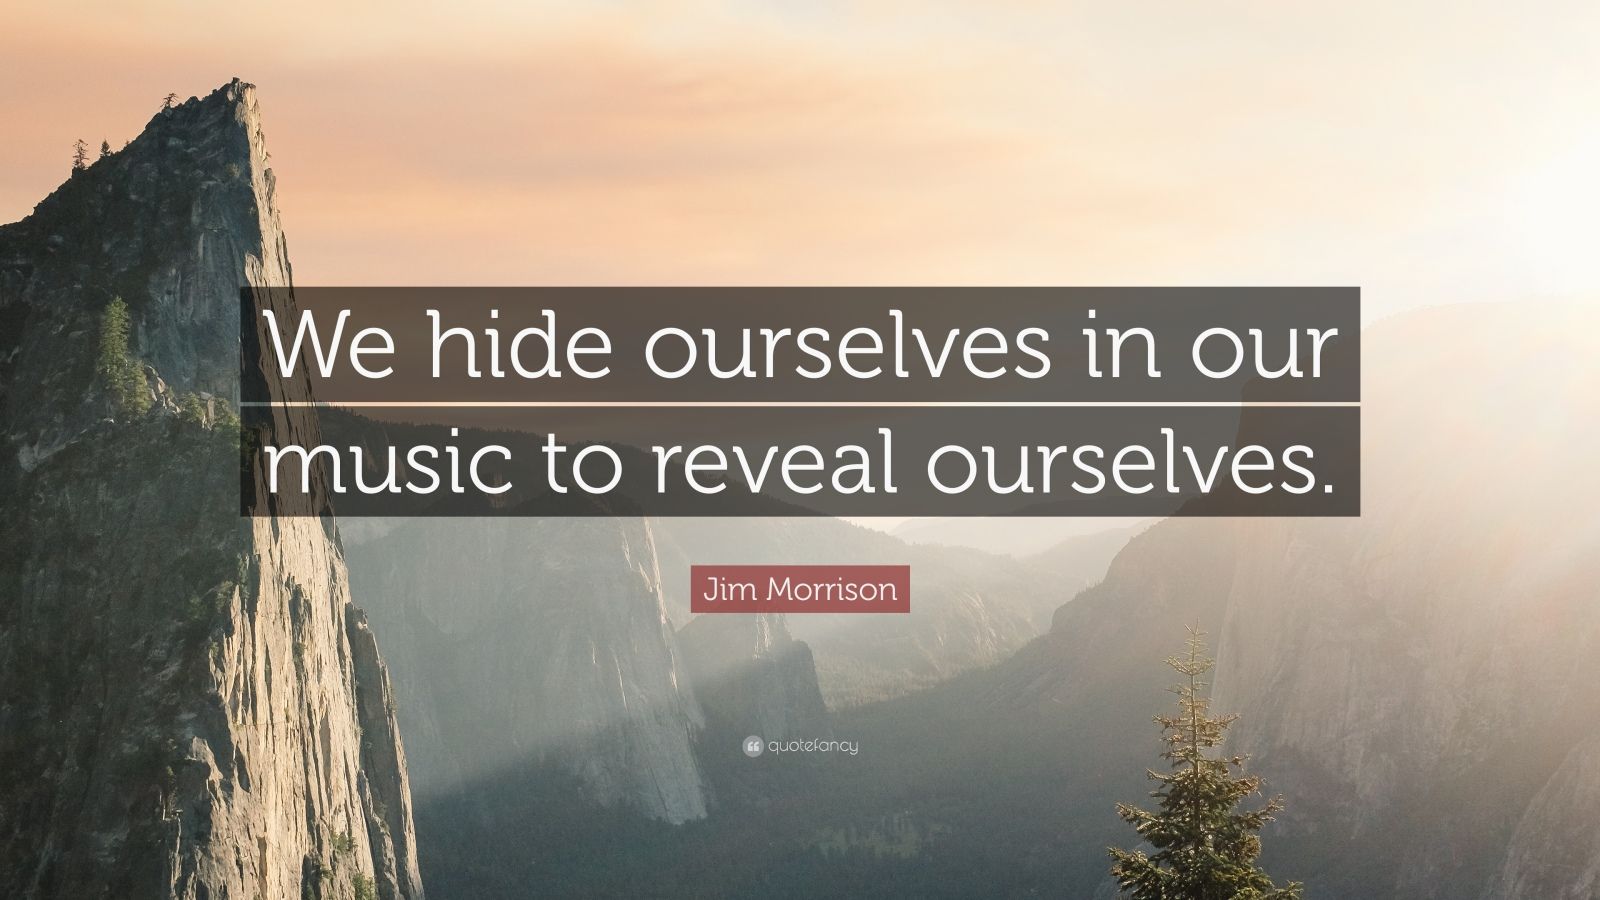 Jim Morrison Quotes Music for kids